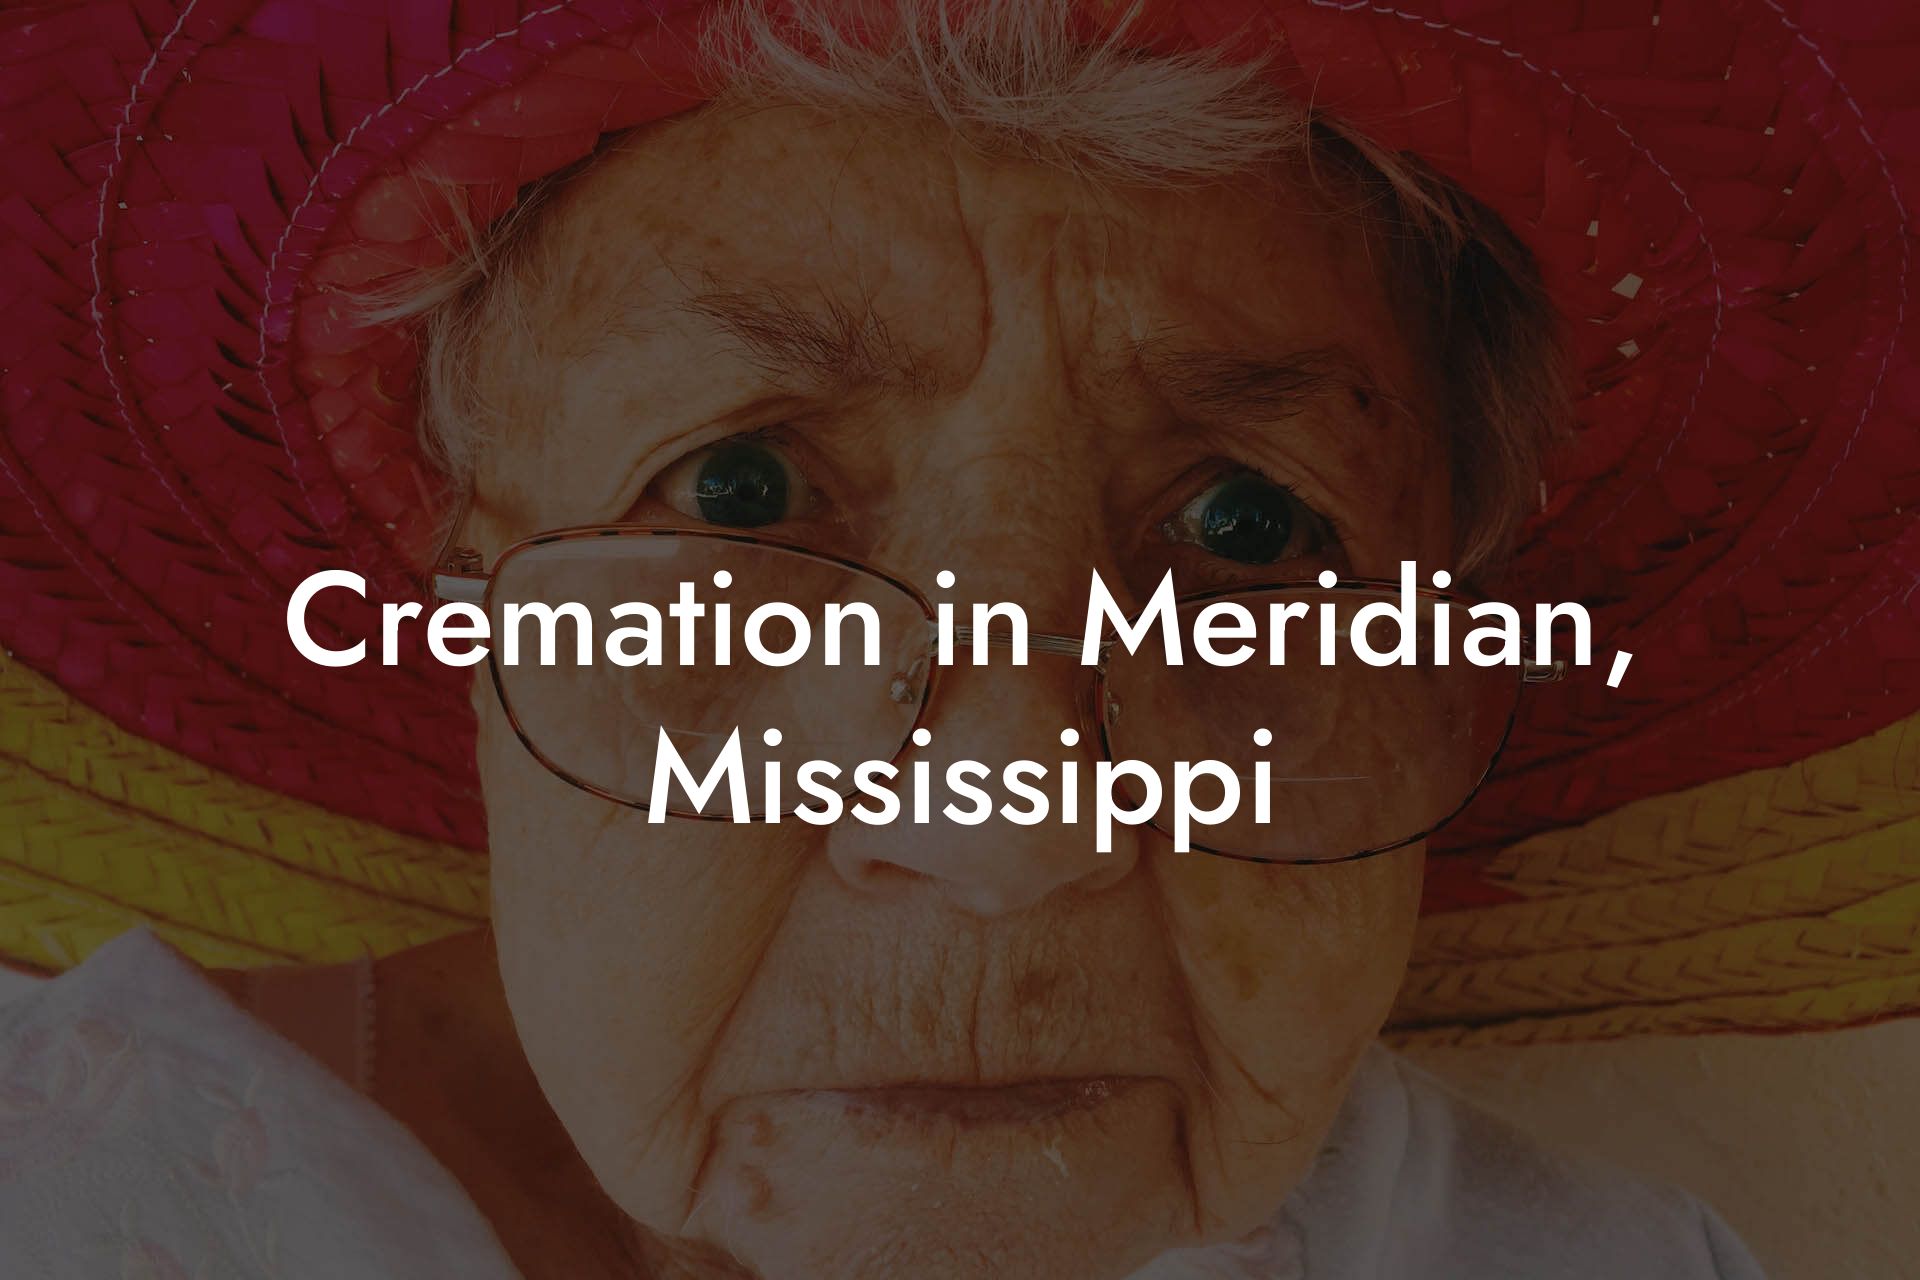 Cremation in Meridian, Mississippi